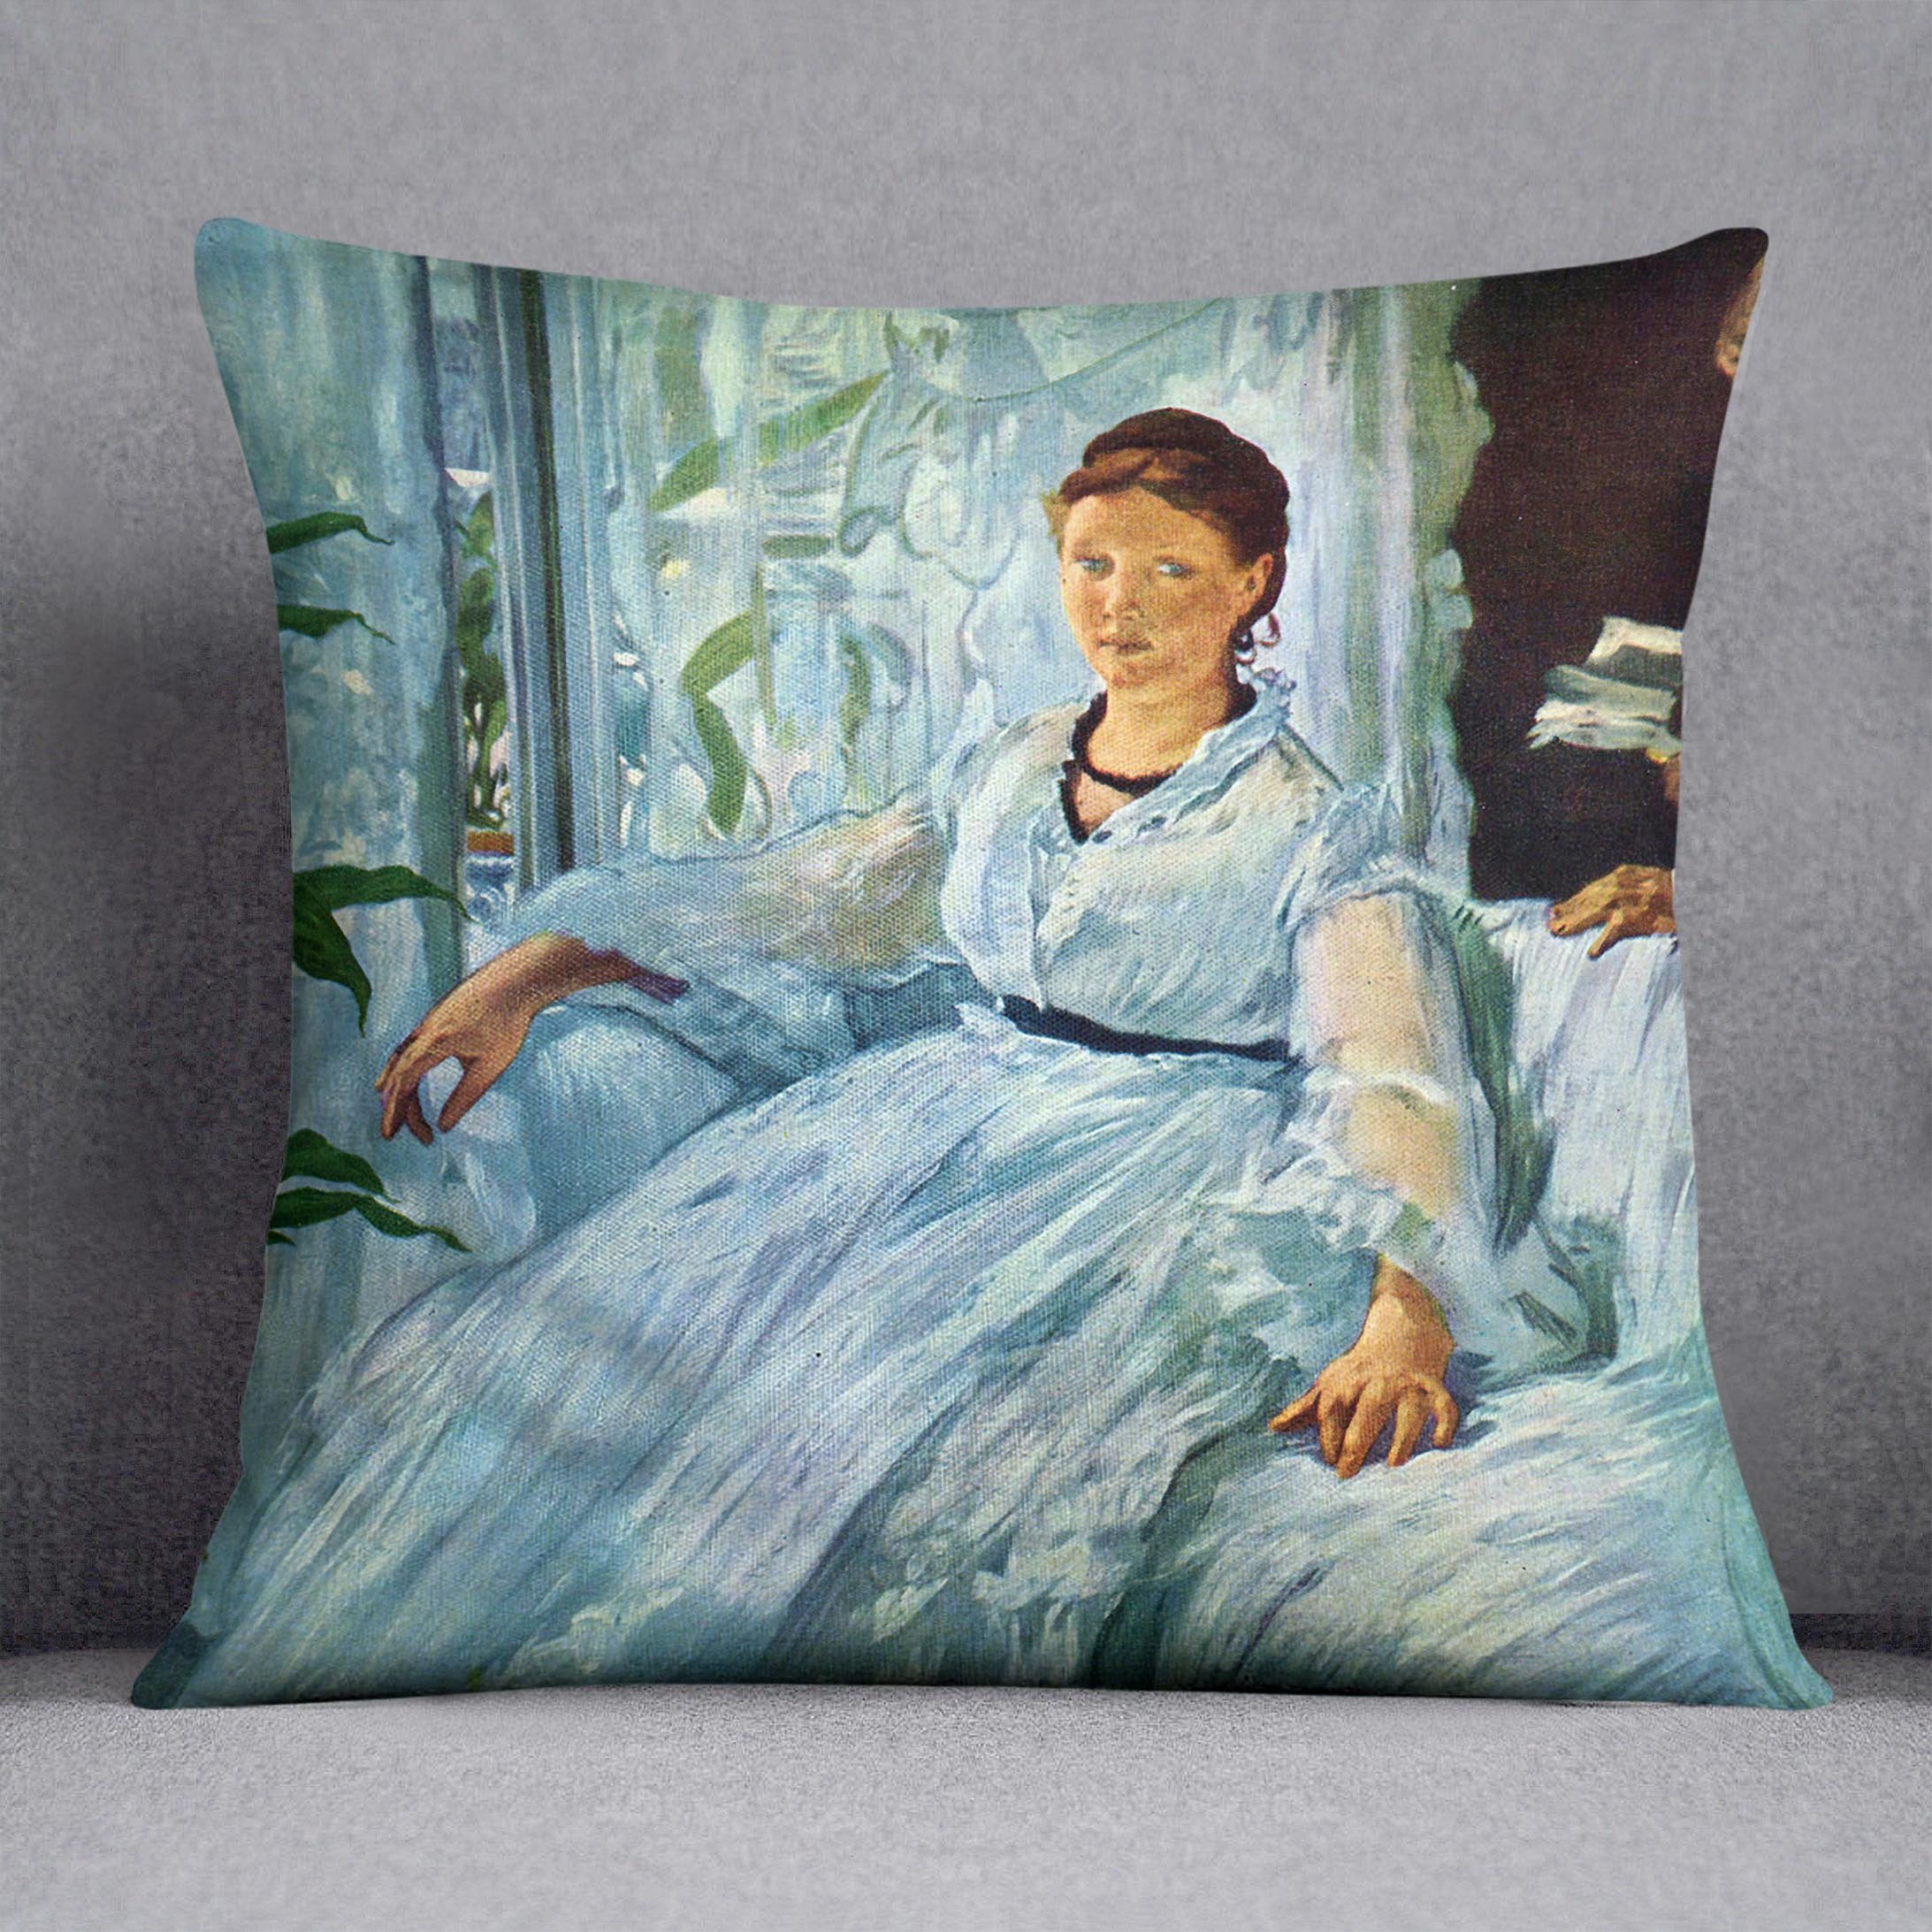 The Lecture by Manet Throw Pillow